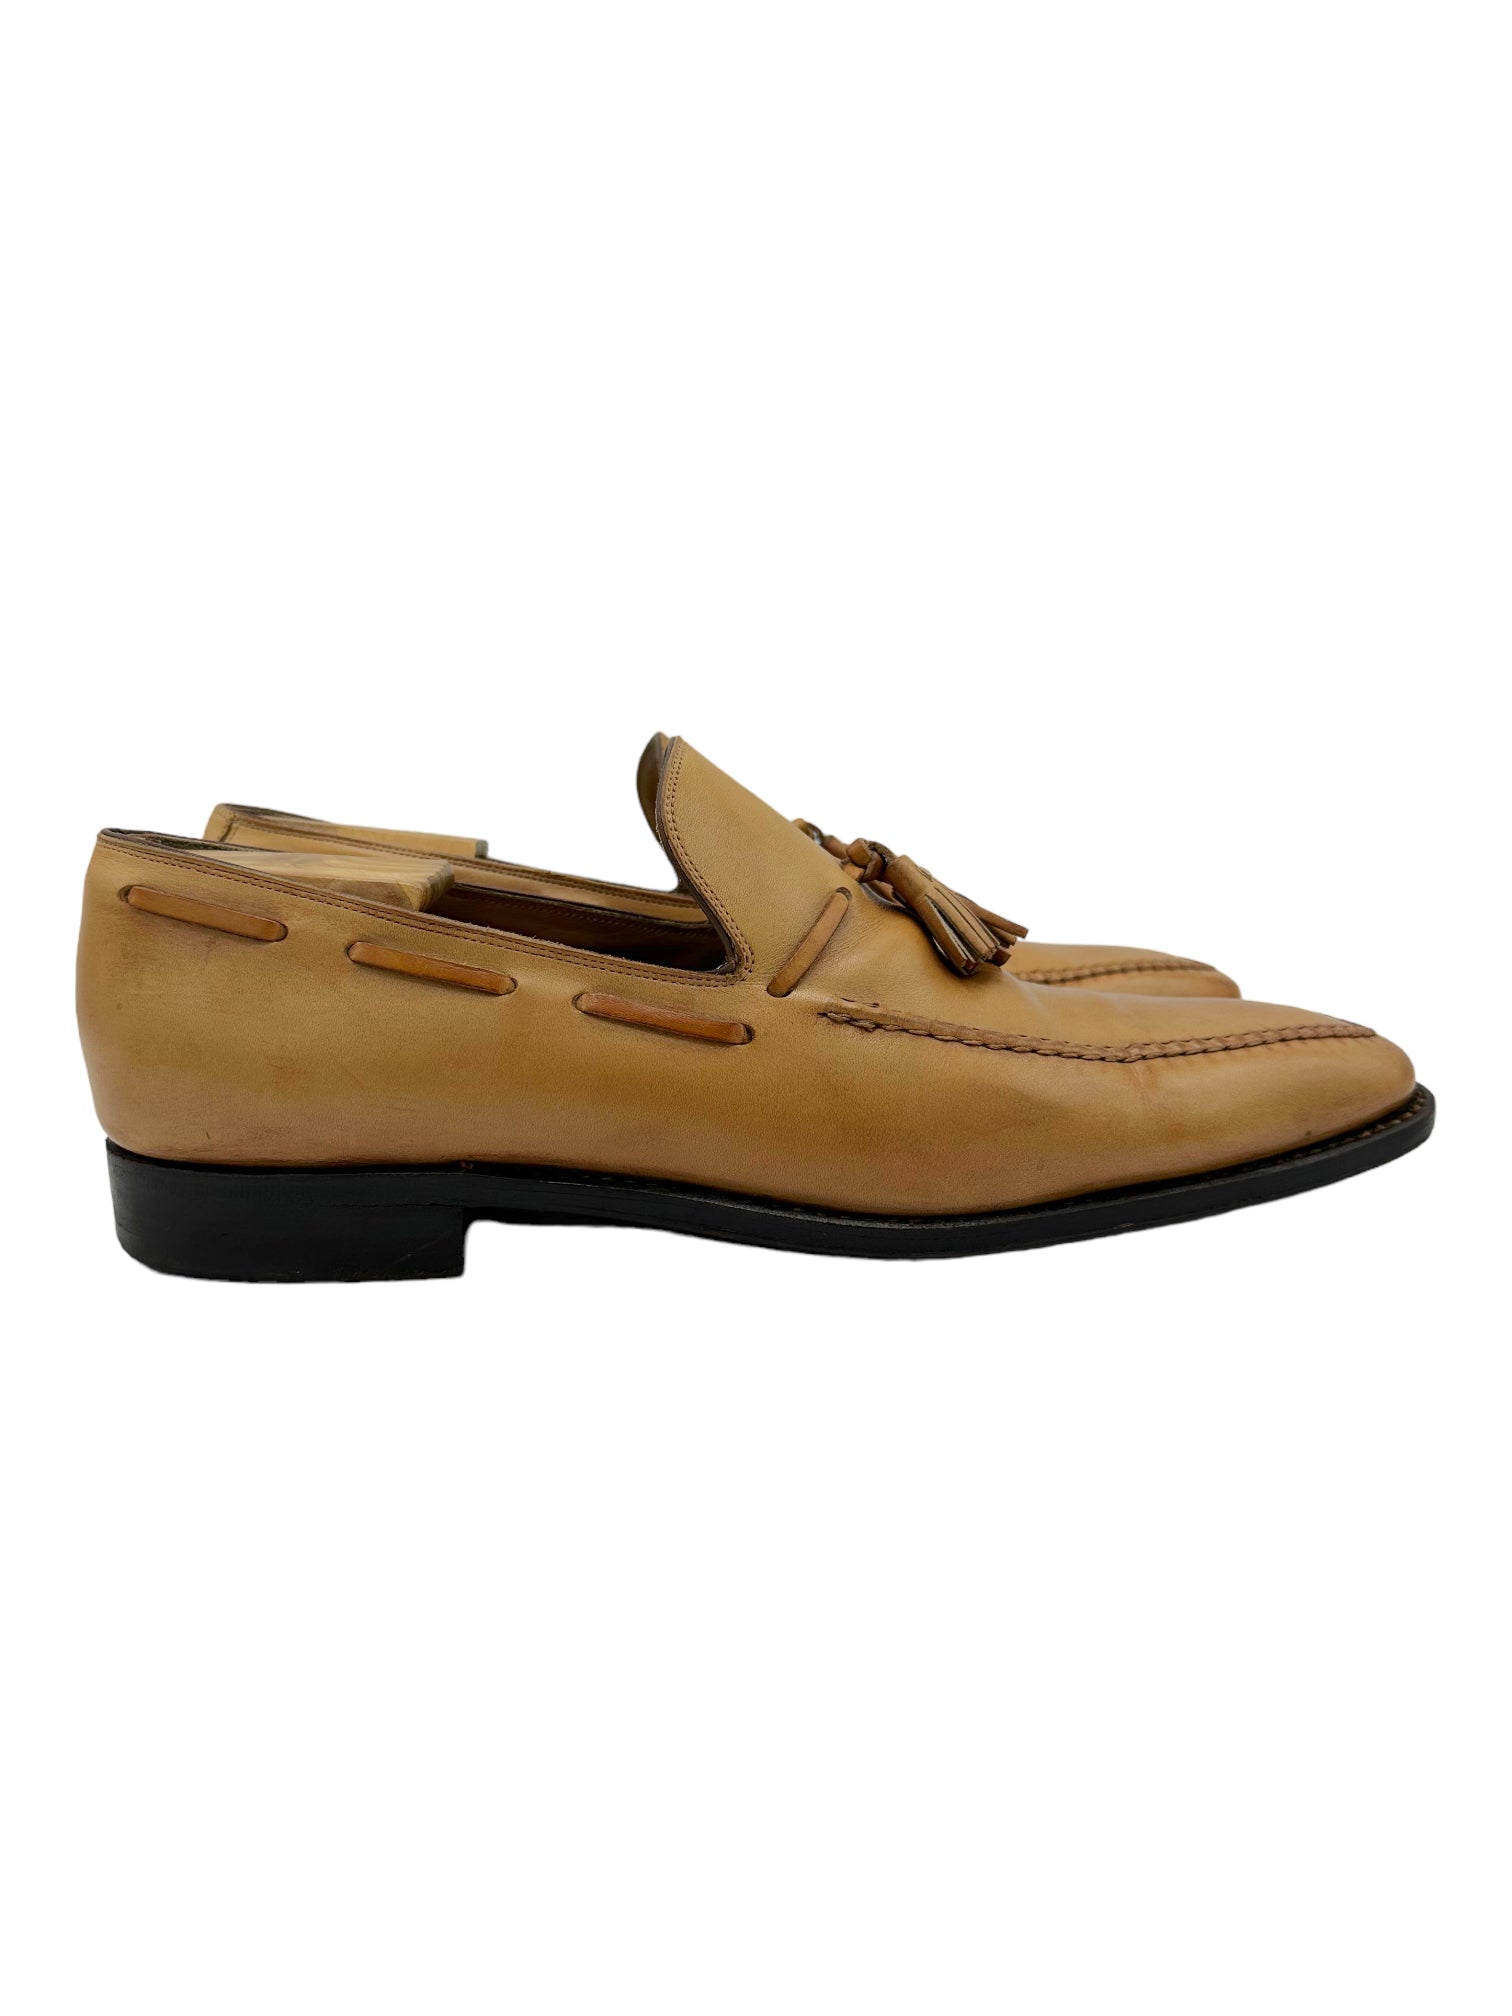 Salvatore Ferragamo Light Brown Tassel Loafer - Genuine Design luxury consignment Calgary, Canada New and pre-owned clothing, shoes, accessories.